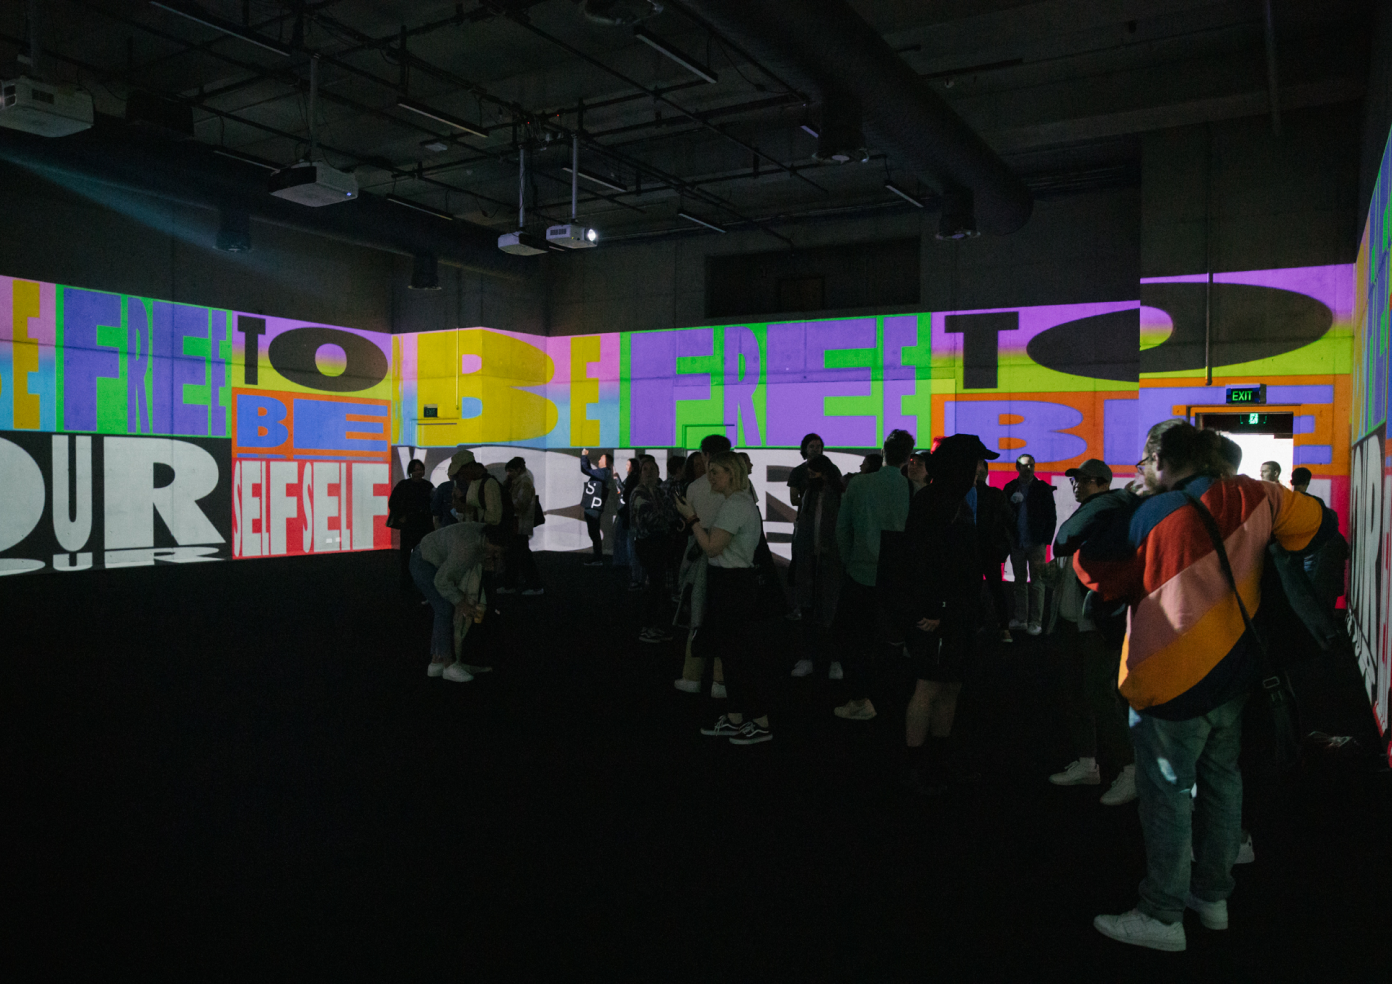 A people filled room entirely covered with brightly coloured artwork projections by Kris Andrew Small